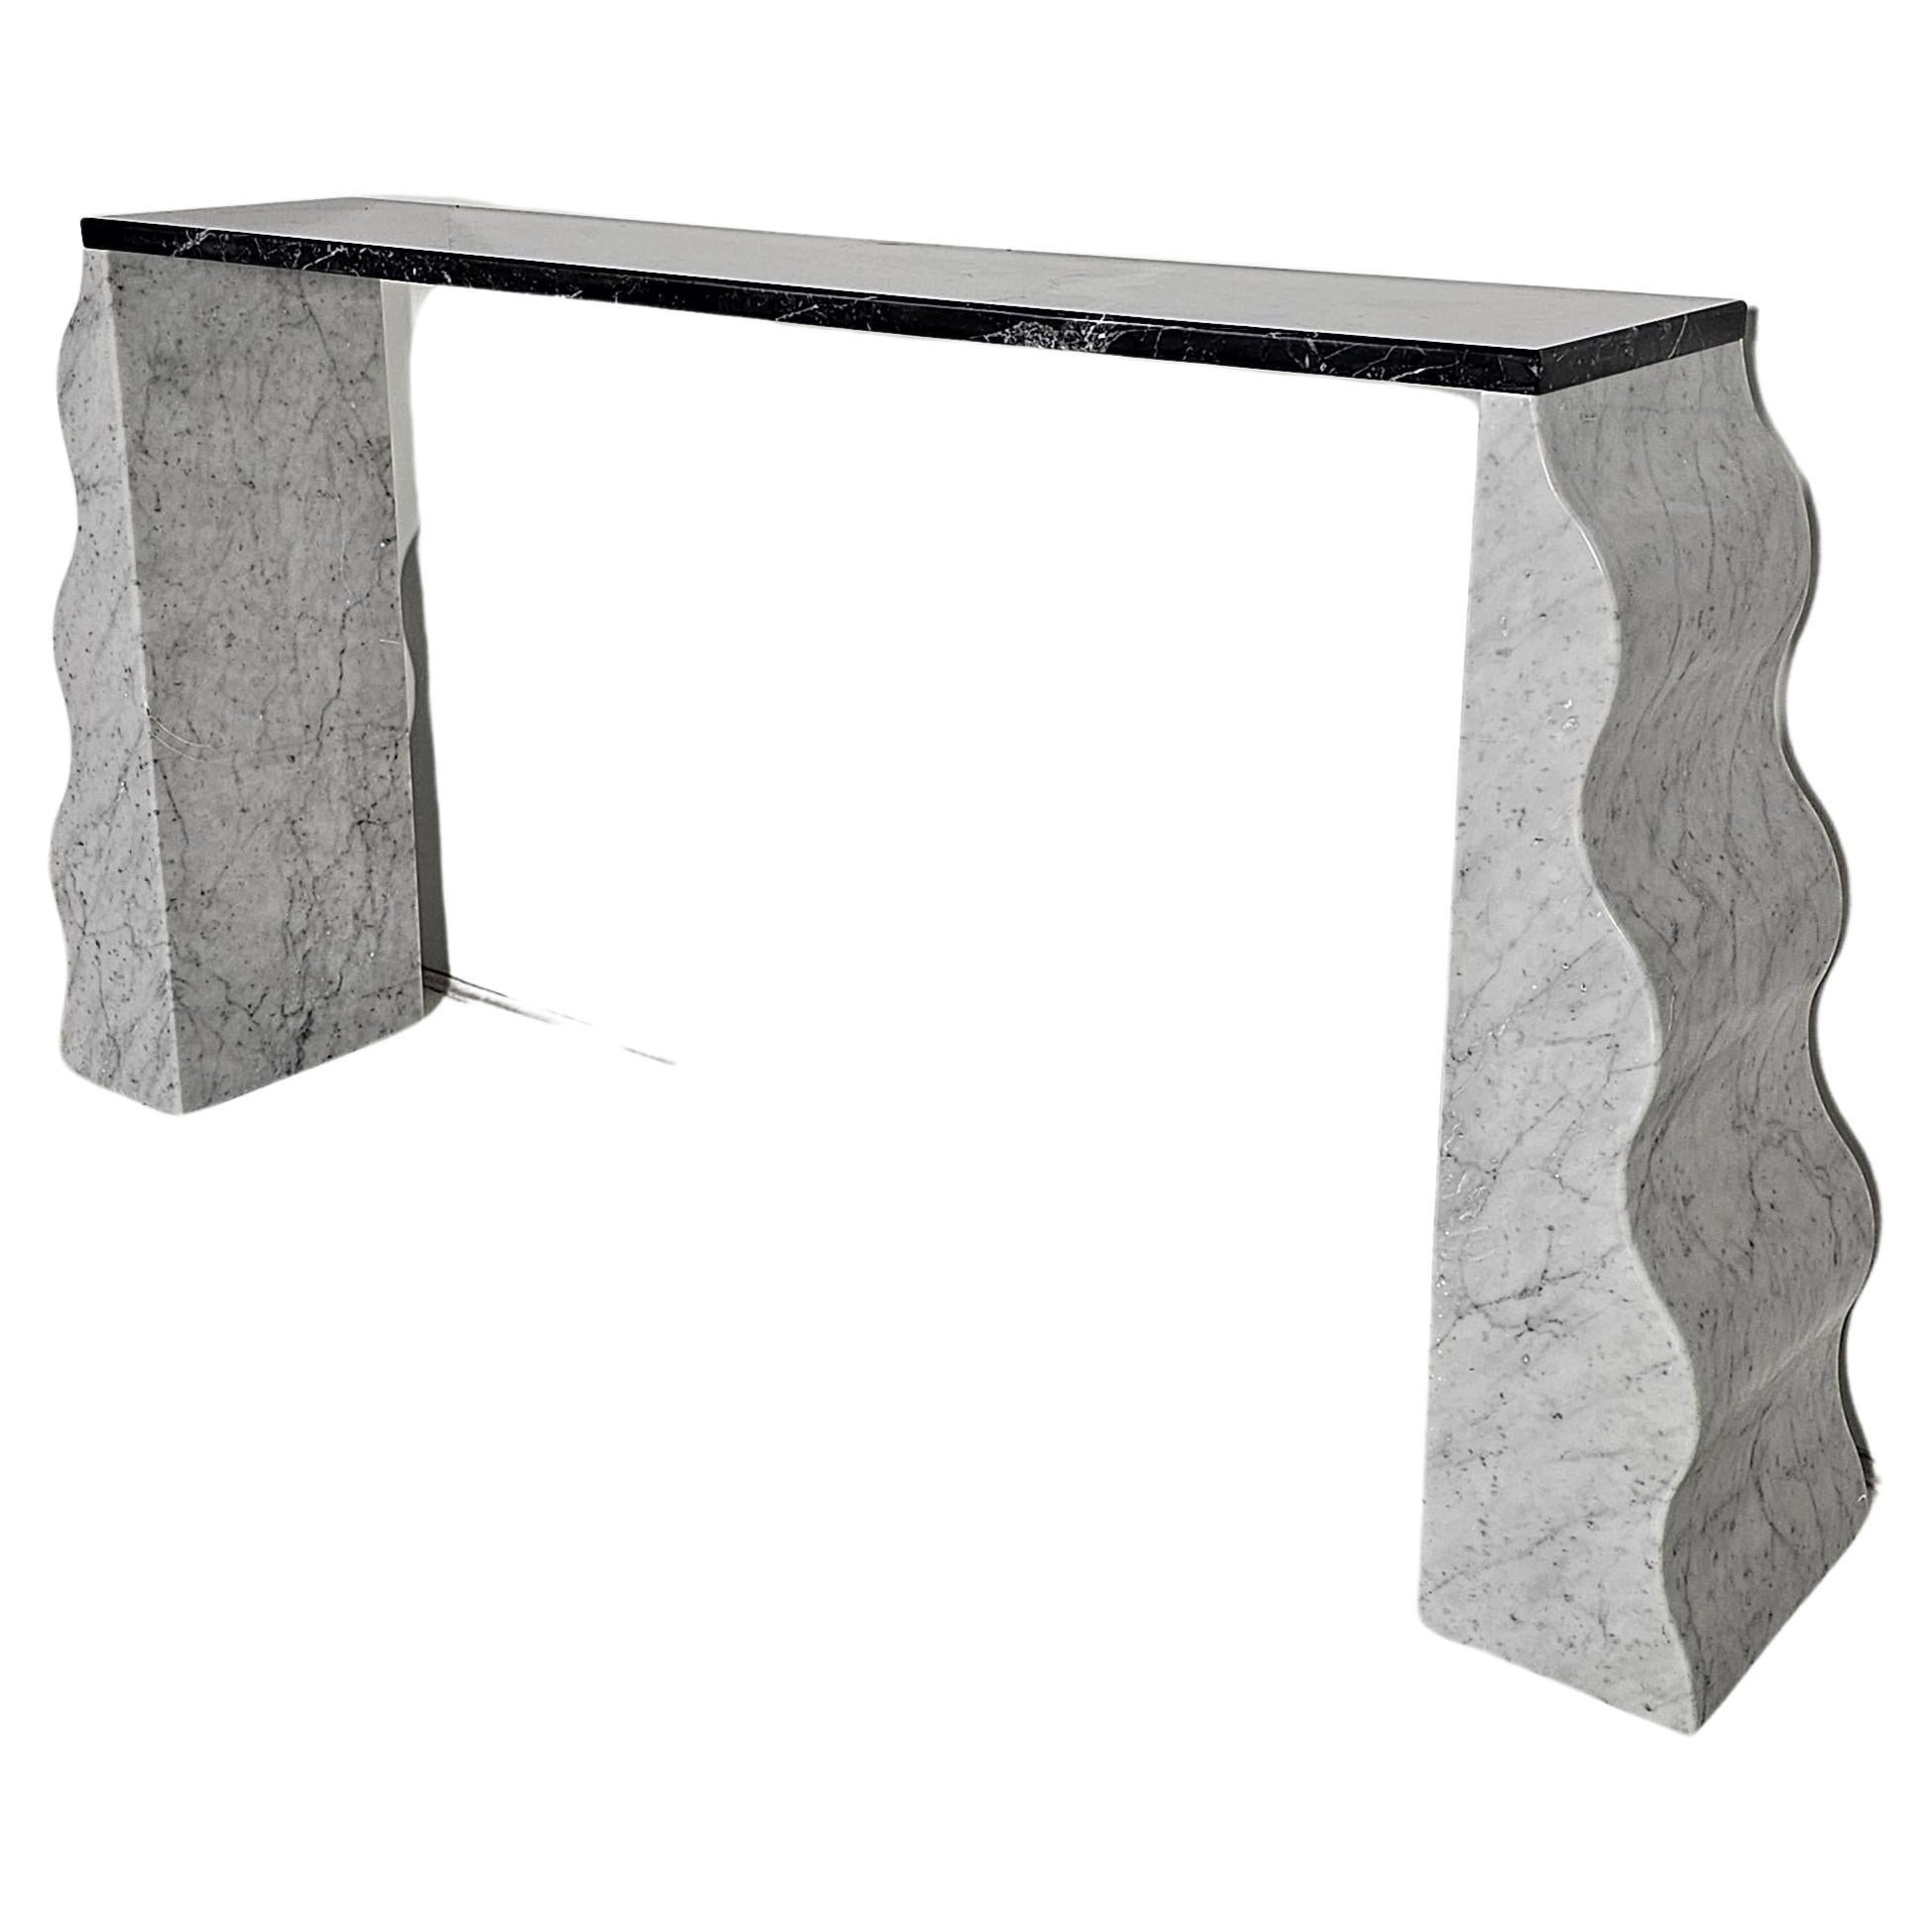 Marble Montenegro Console Table by Ettore Sottsass for Ultima Edizione, 1980s For Sale